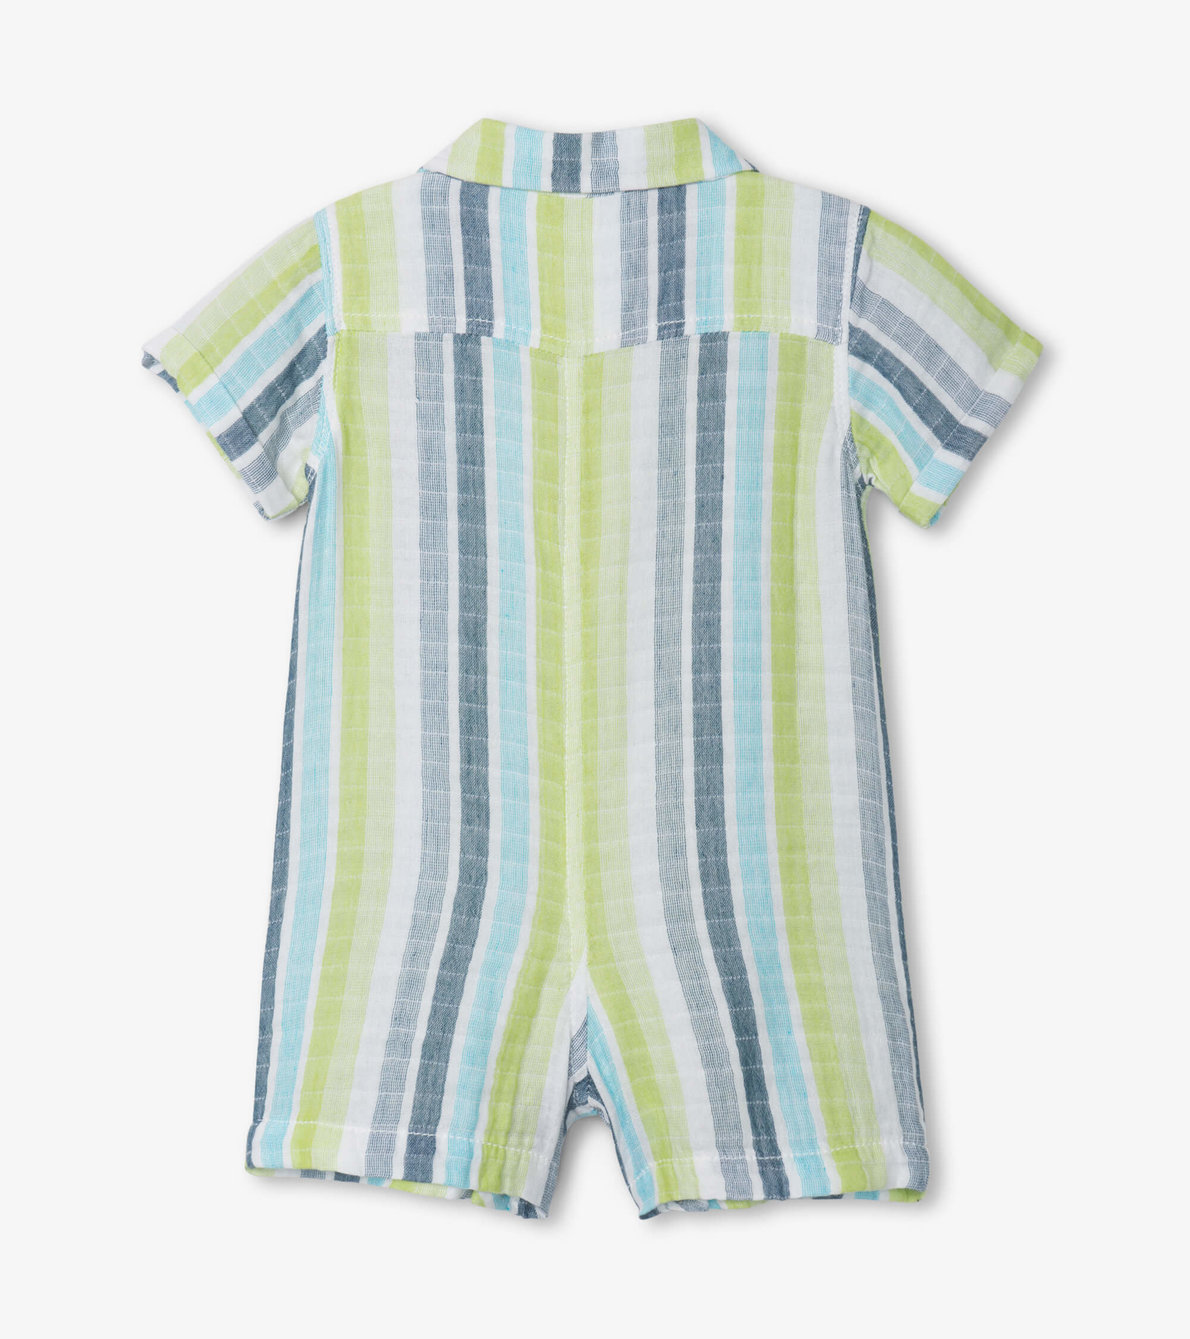 View larger image of Seaside Stripe Baby Woven Romper